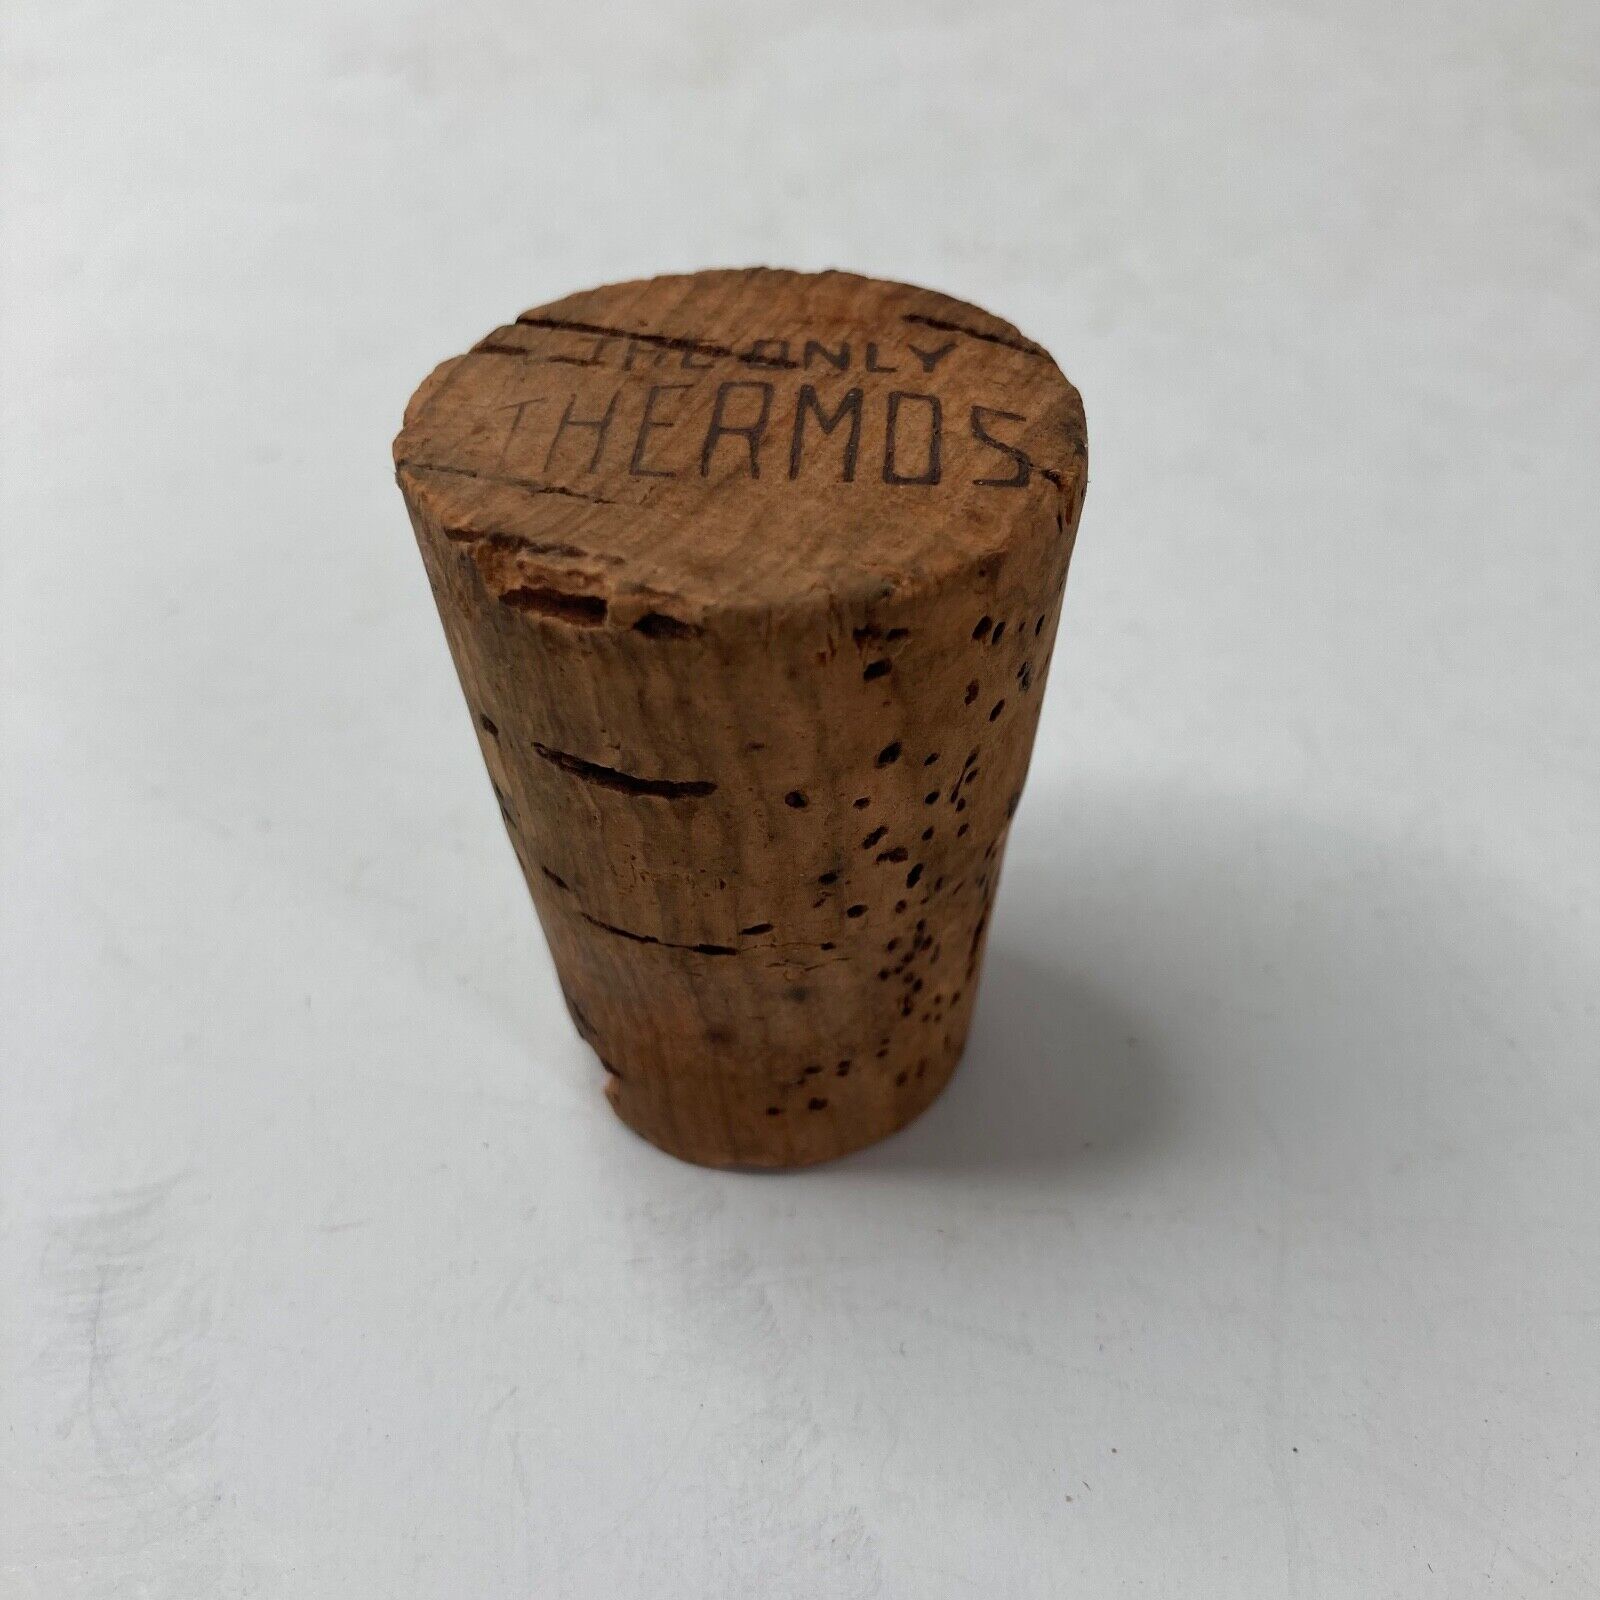 Vintage THE ONLY THERMOS  Cork Stopper - Cork #2 Fast Shipping